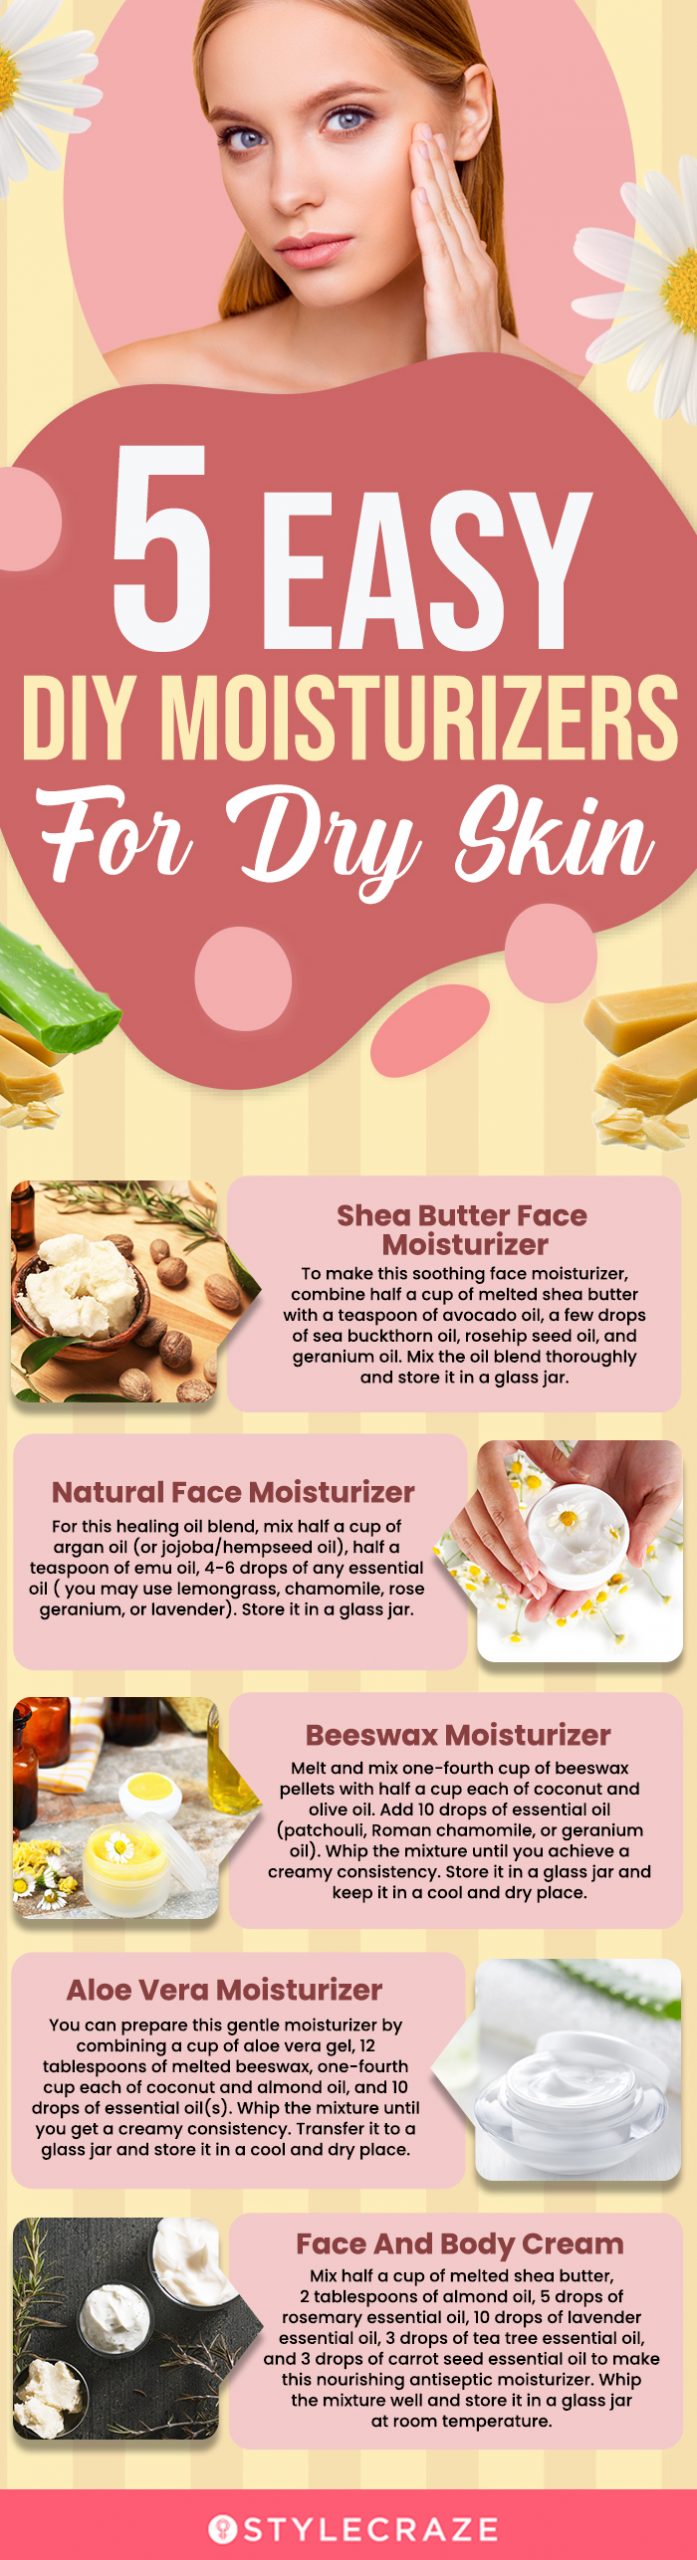 5 easy diy moisturizers for dry skin [infographic]